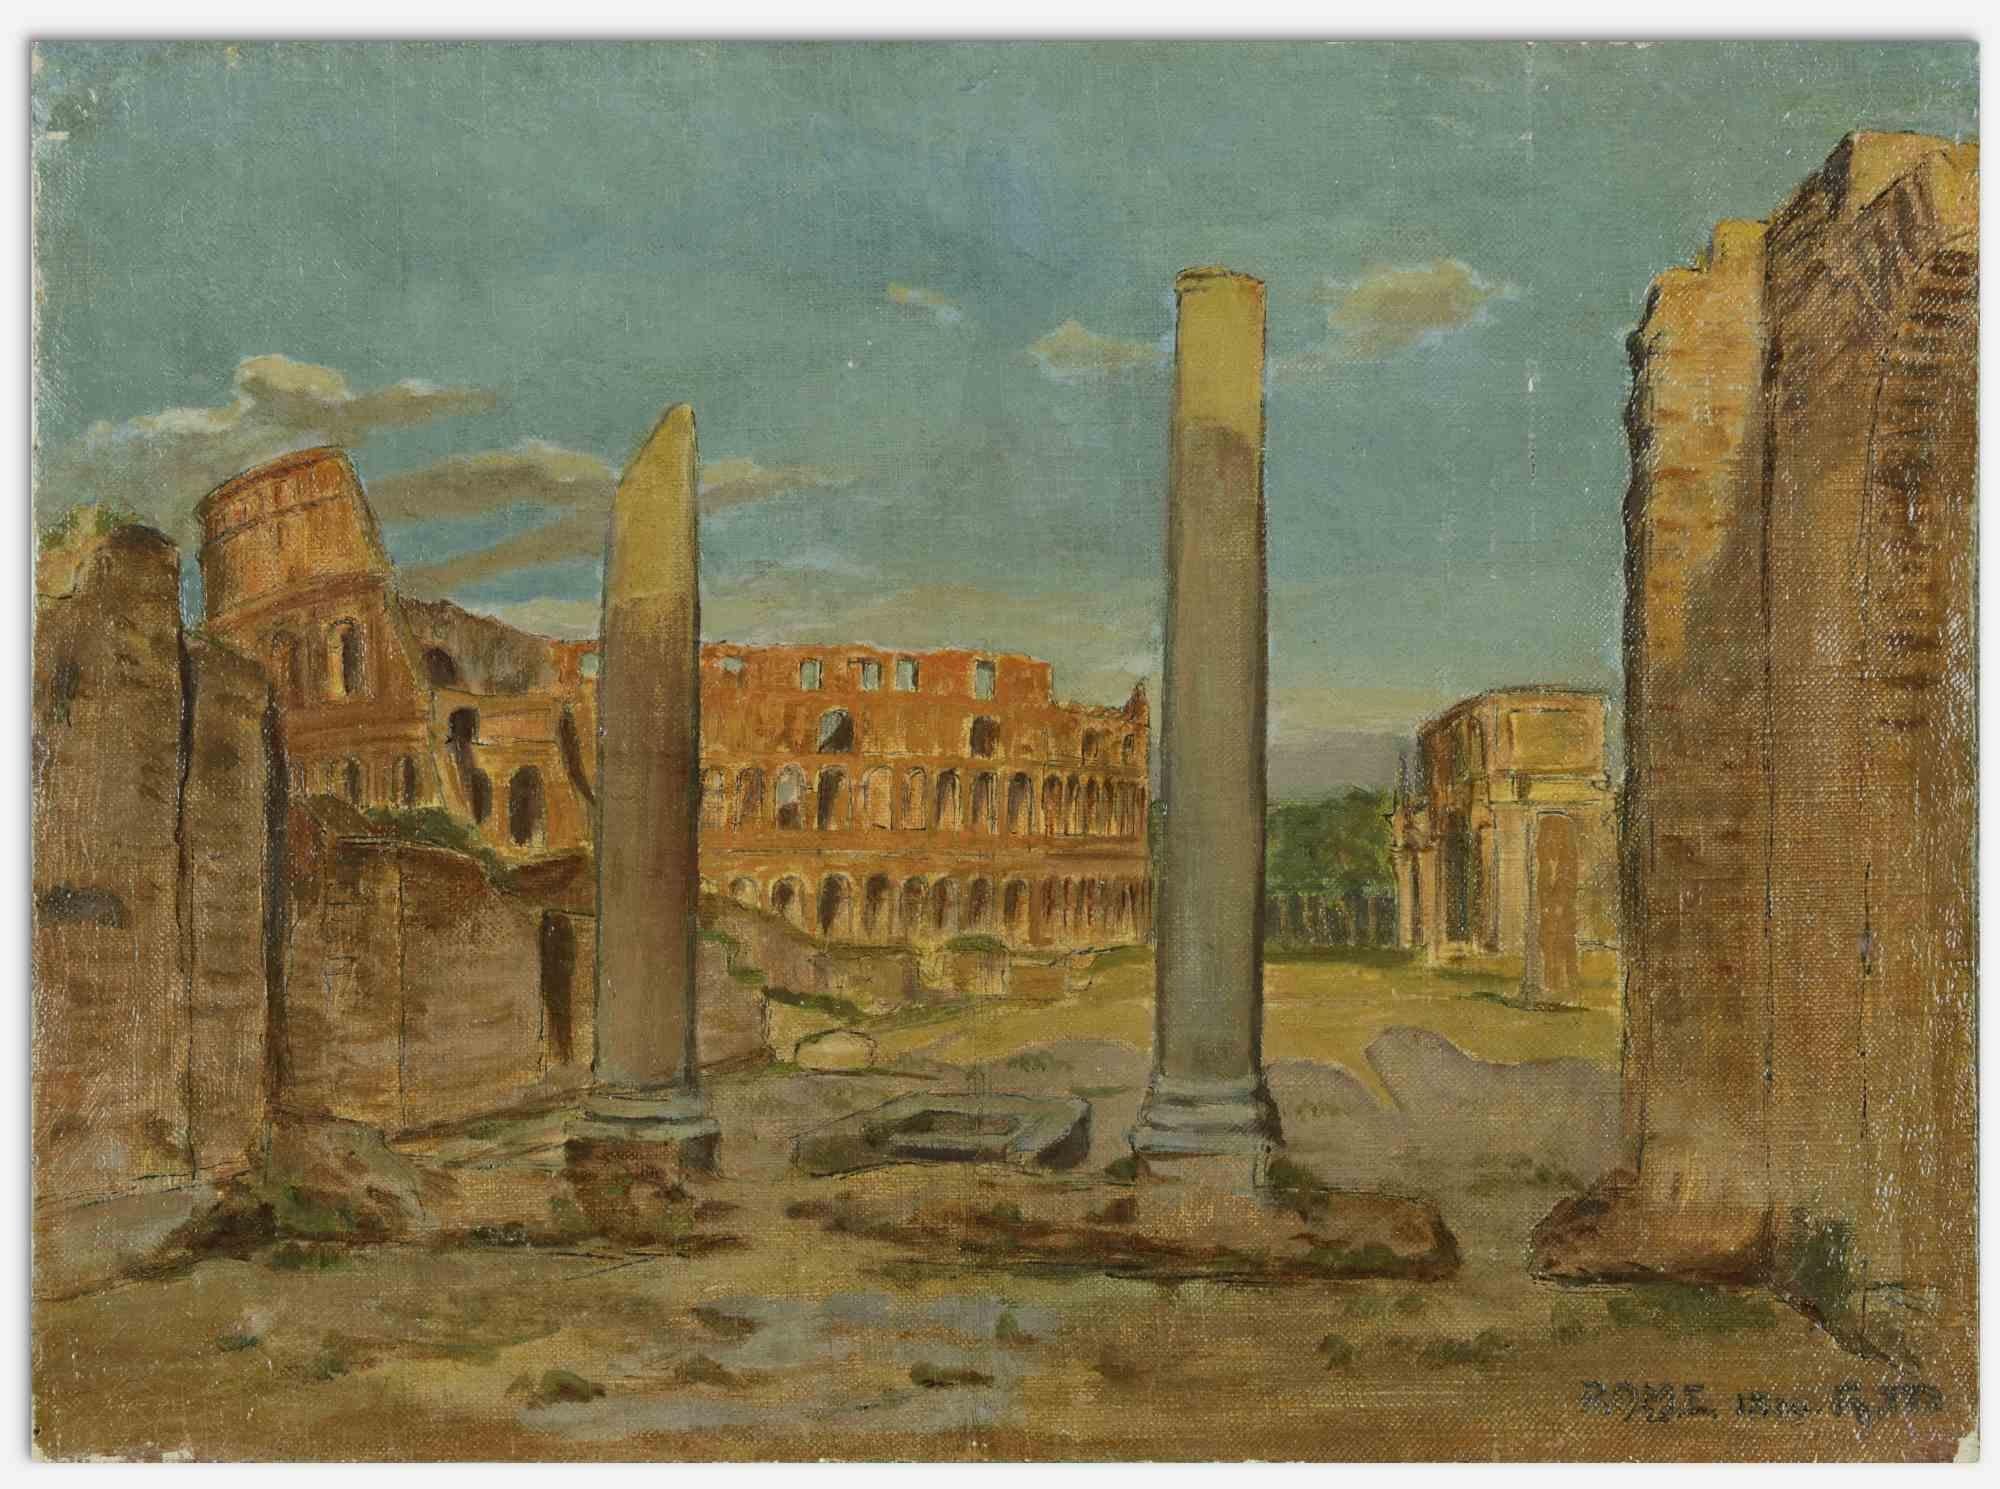 Imperial Forums and Coliseum on the Background - Oil Paint - 1899